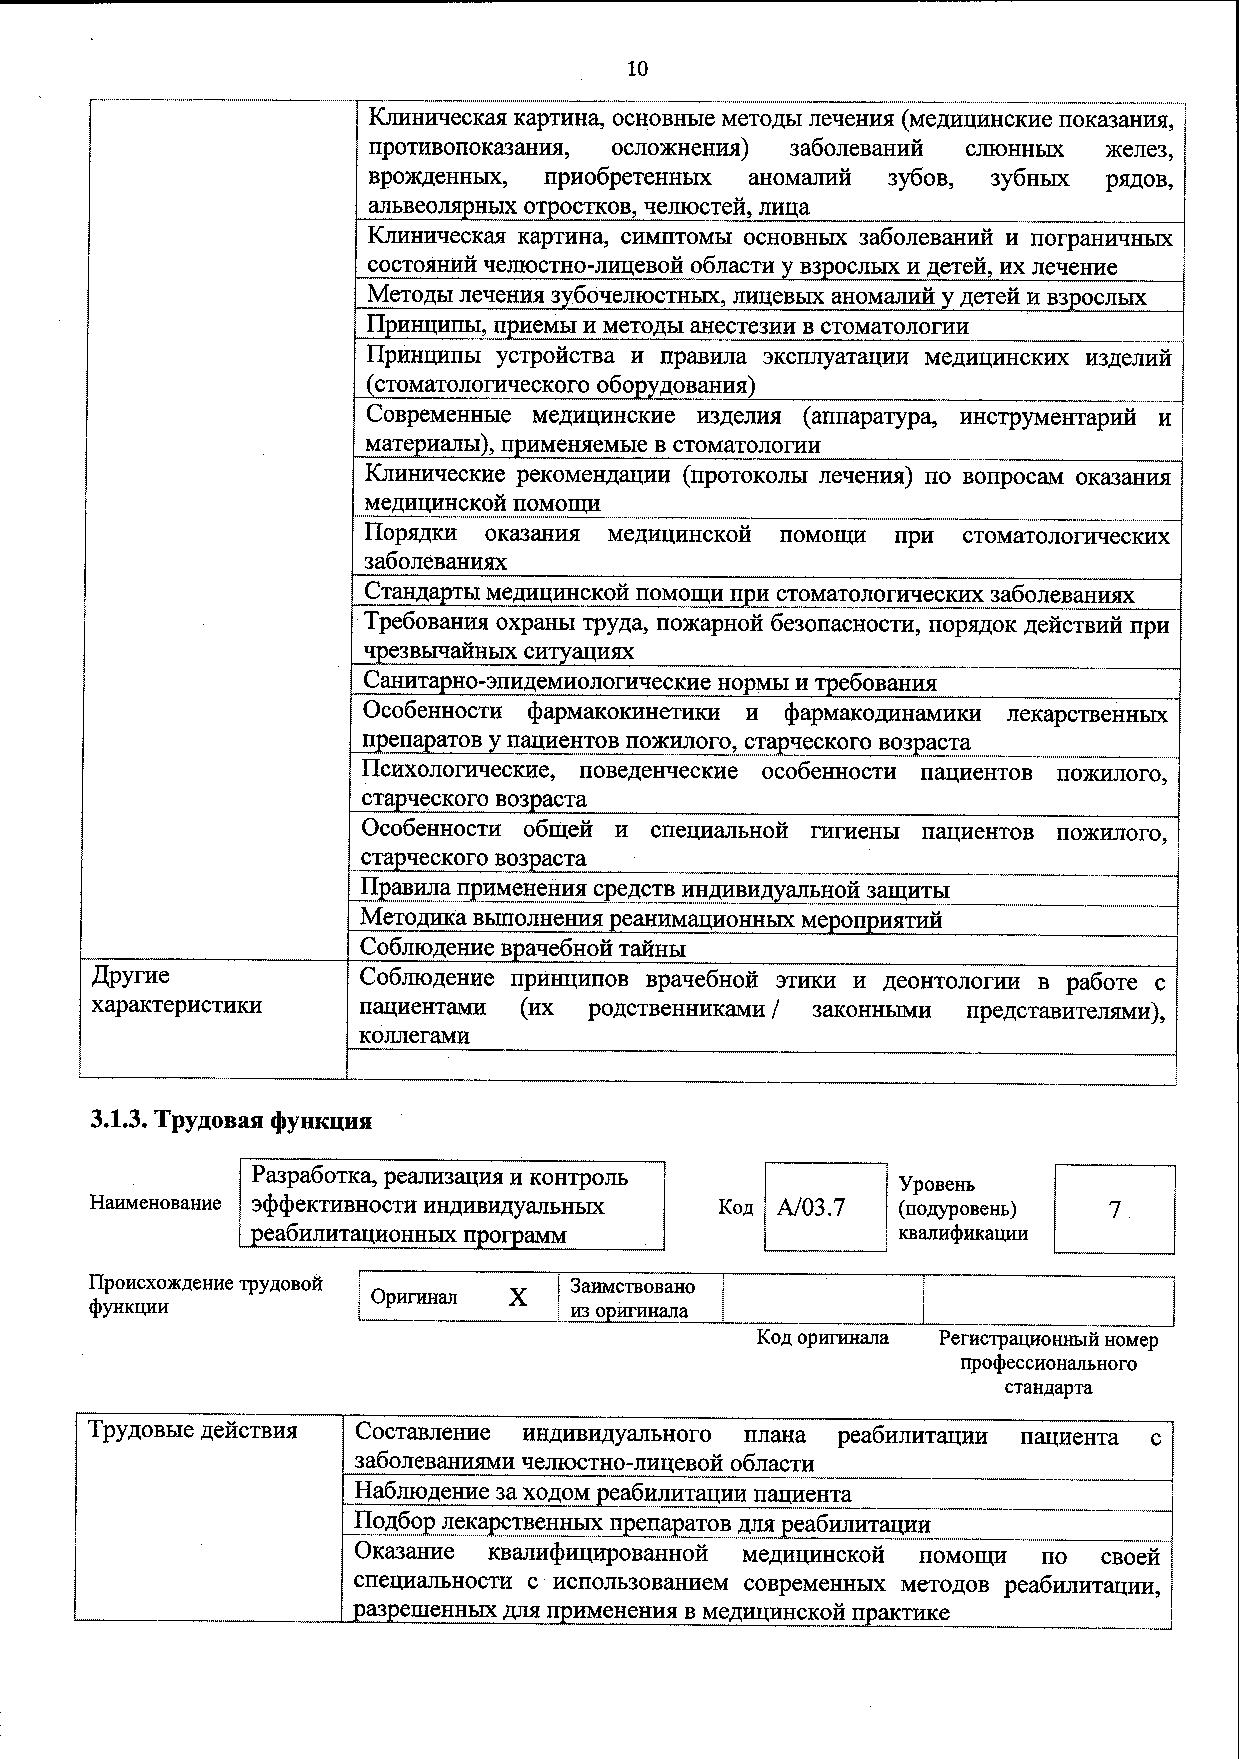 Document-page-011